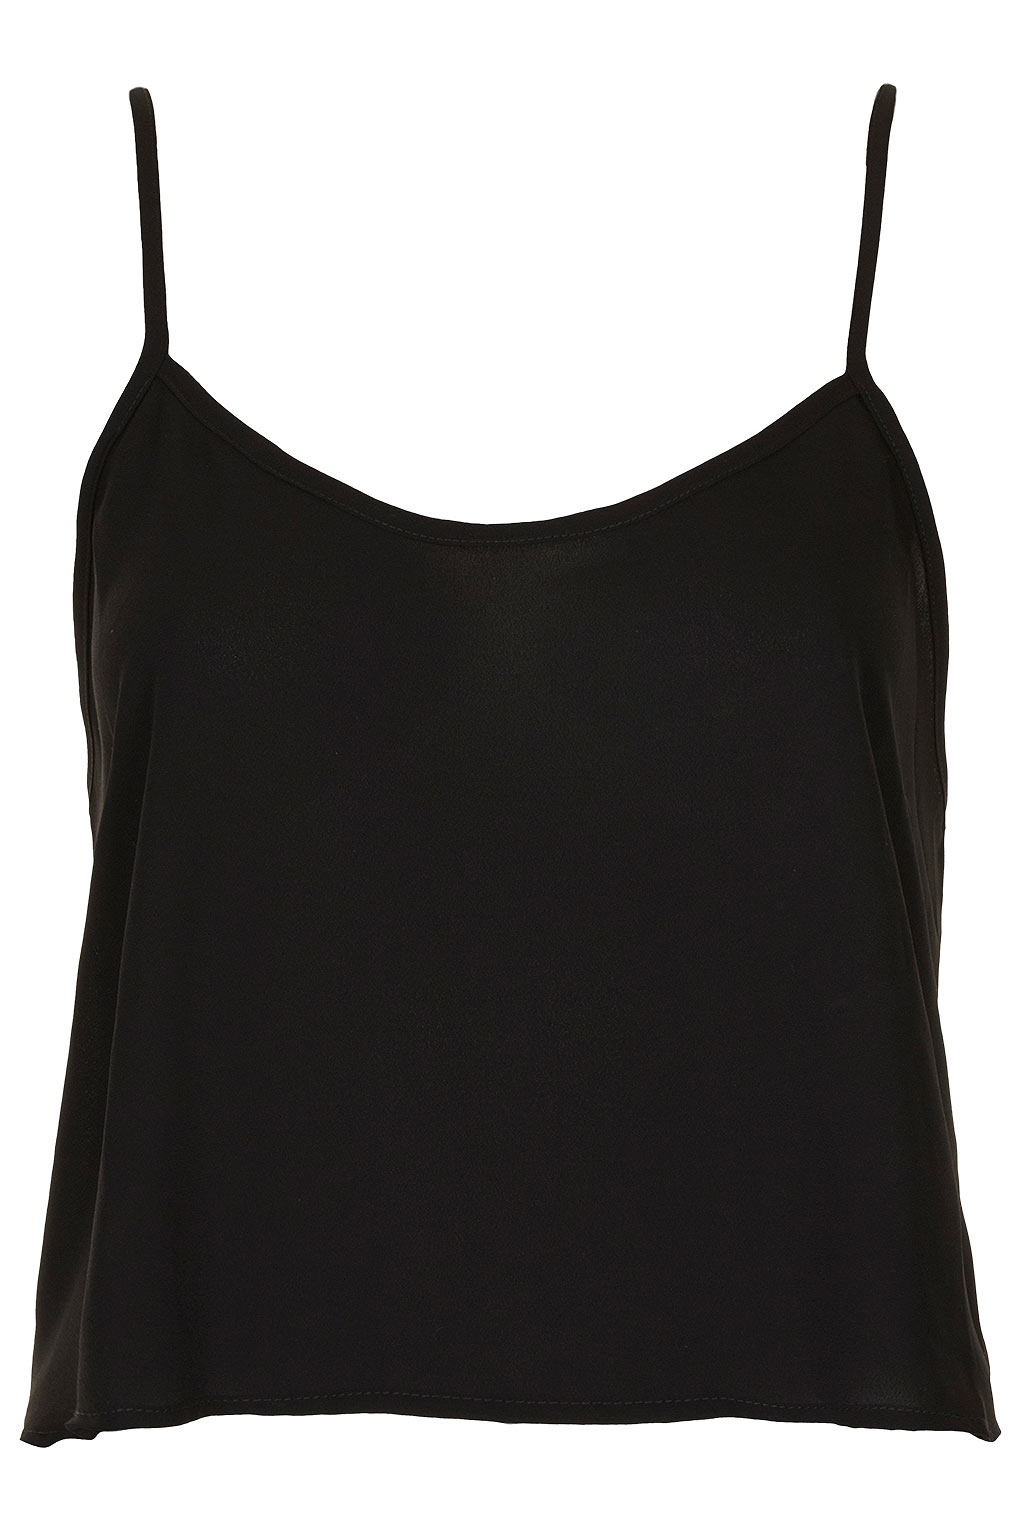 Topshop Cropped Soft Cami in Black | Lyst